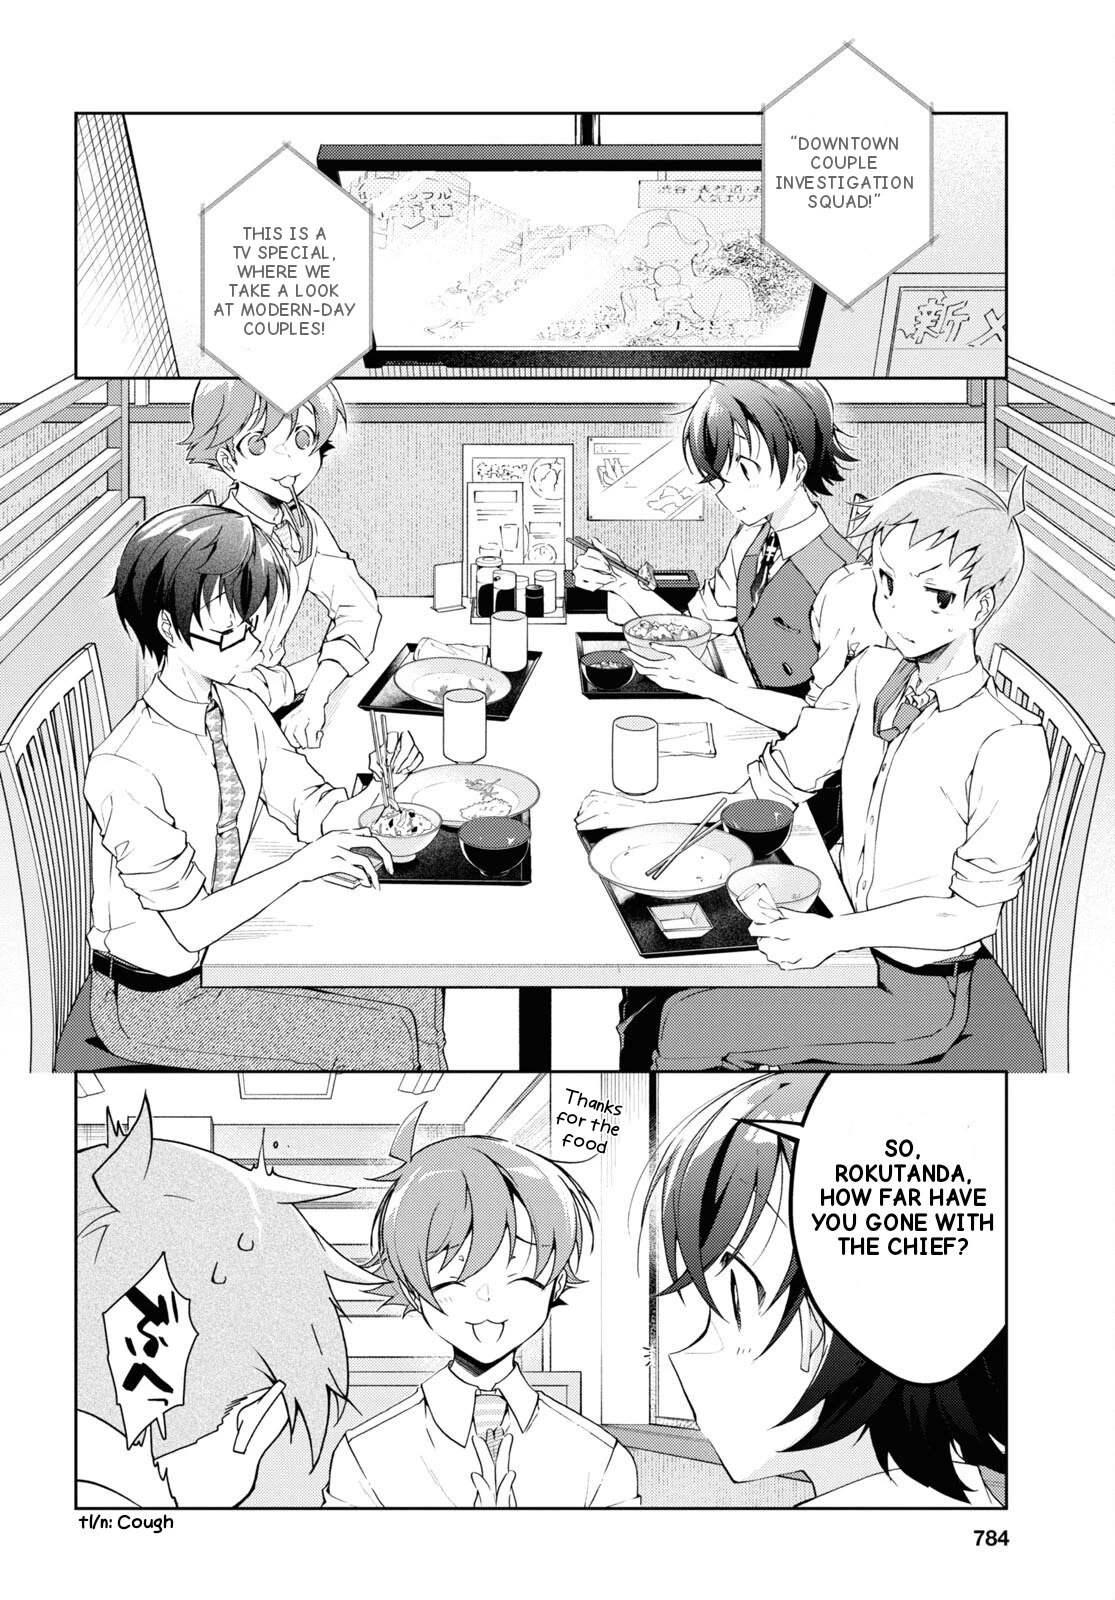 Isshiki-san Wants to Know About Love. - chapter 28 - #4